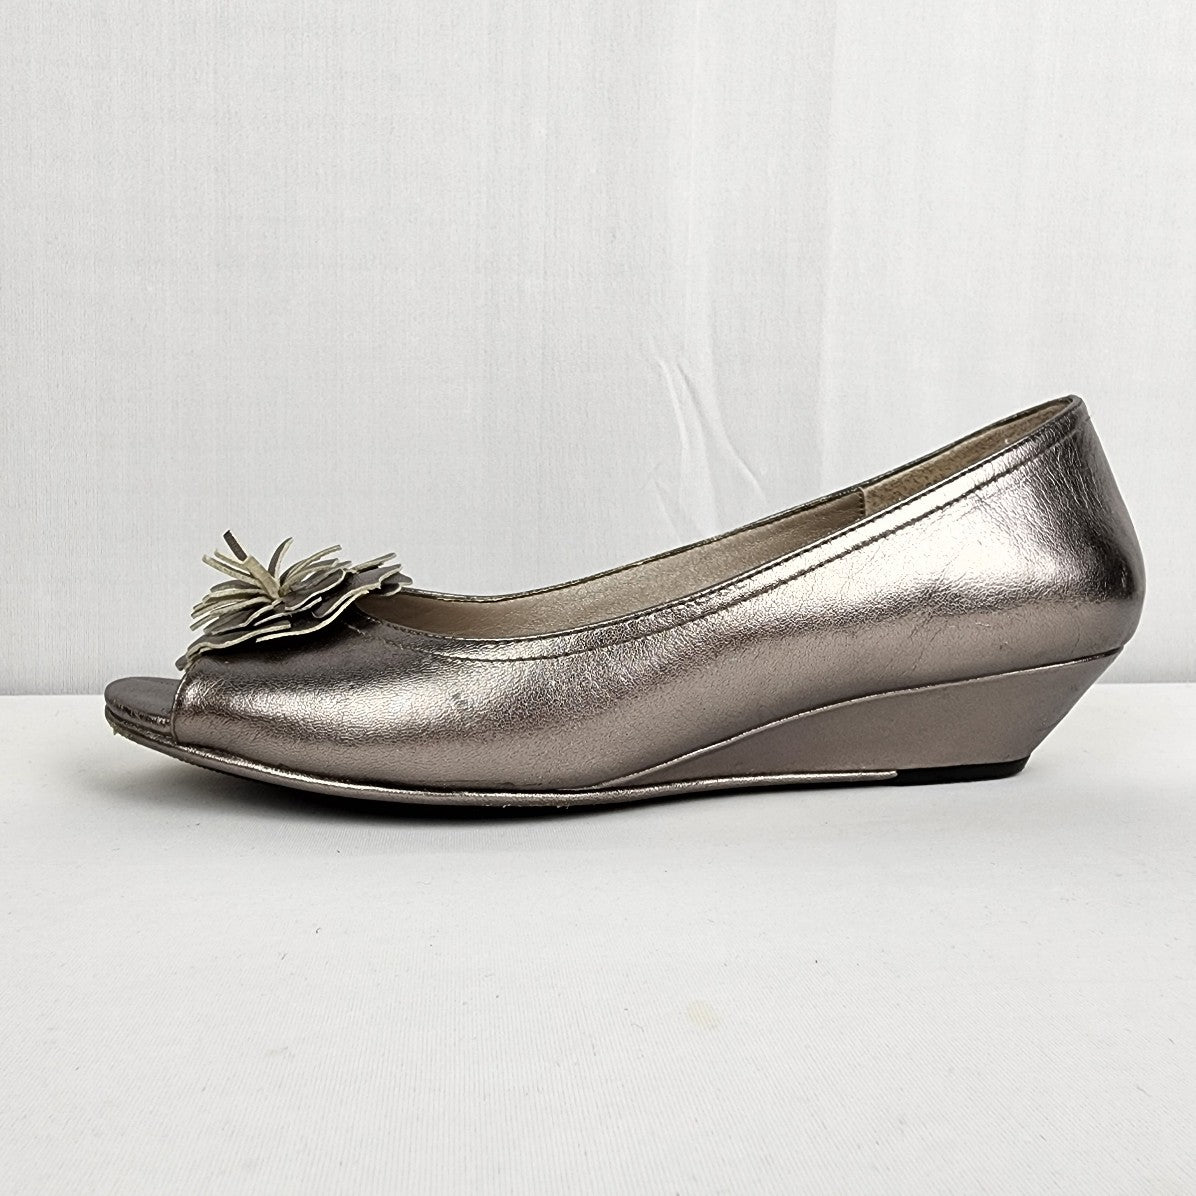 Naturalizer Silver Leather Flower Detail Low Heel Peep Toe Shoes Size 9